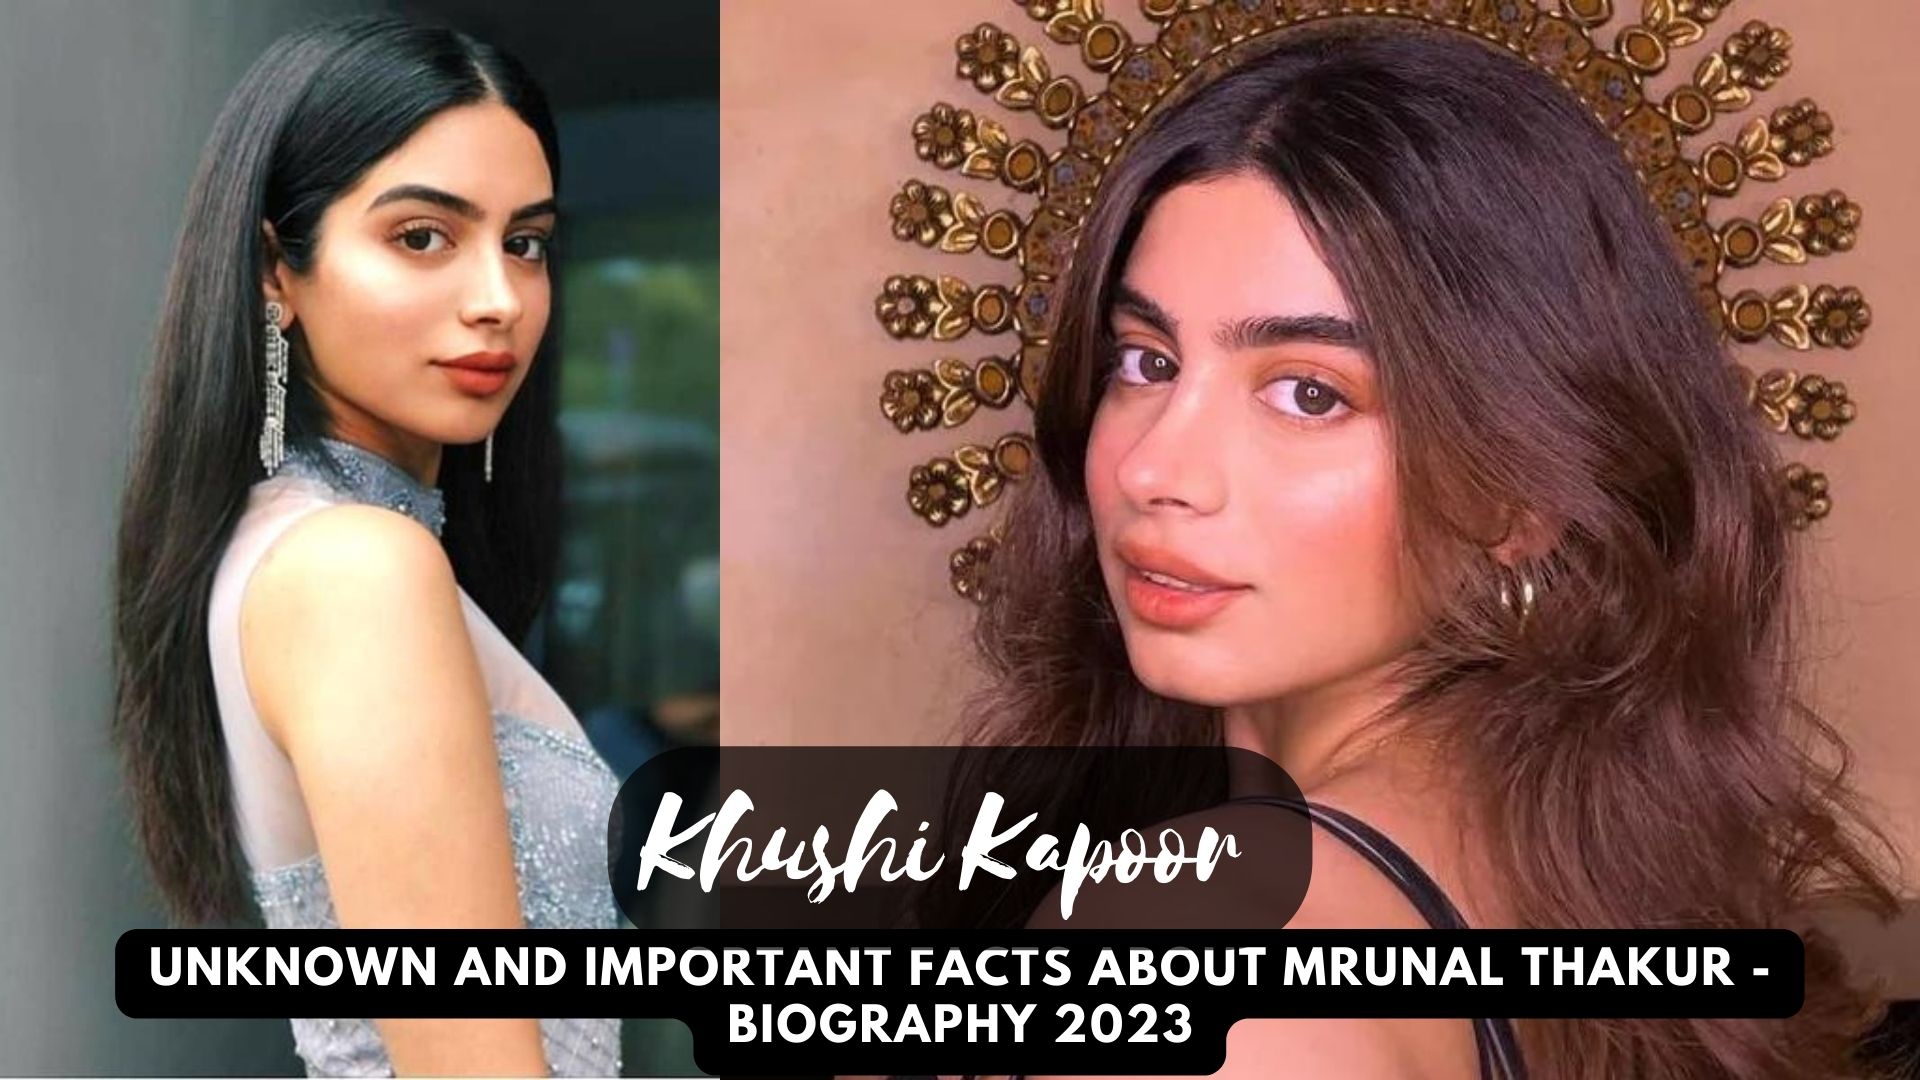 Unknown Facts About Khushi Kapoor - Biography 2023